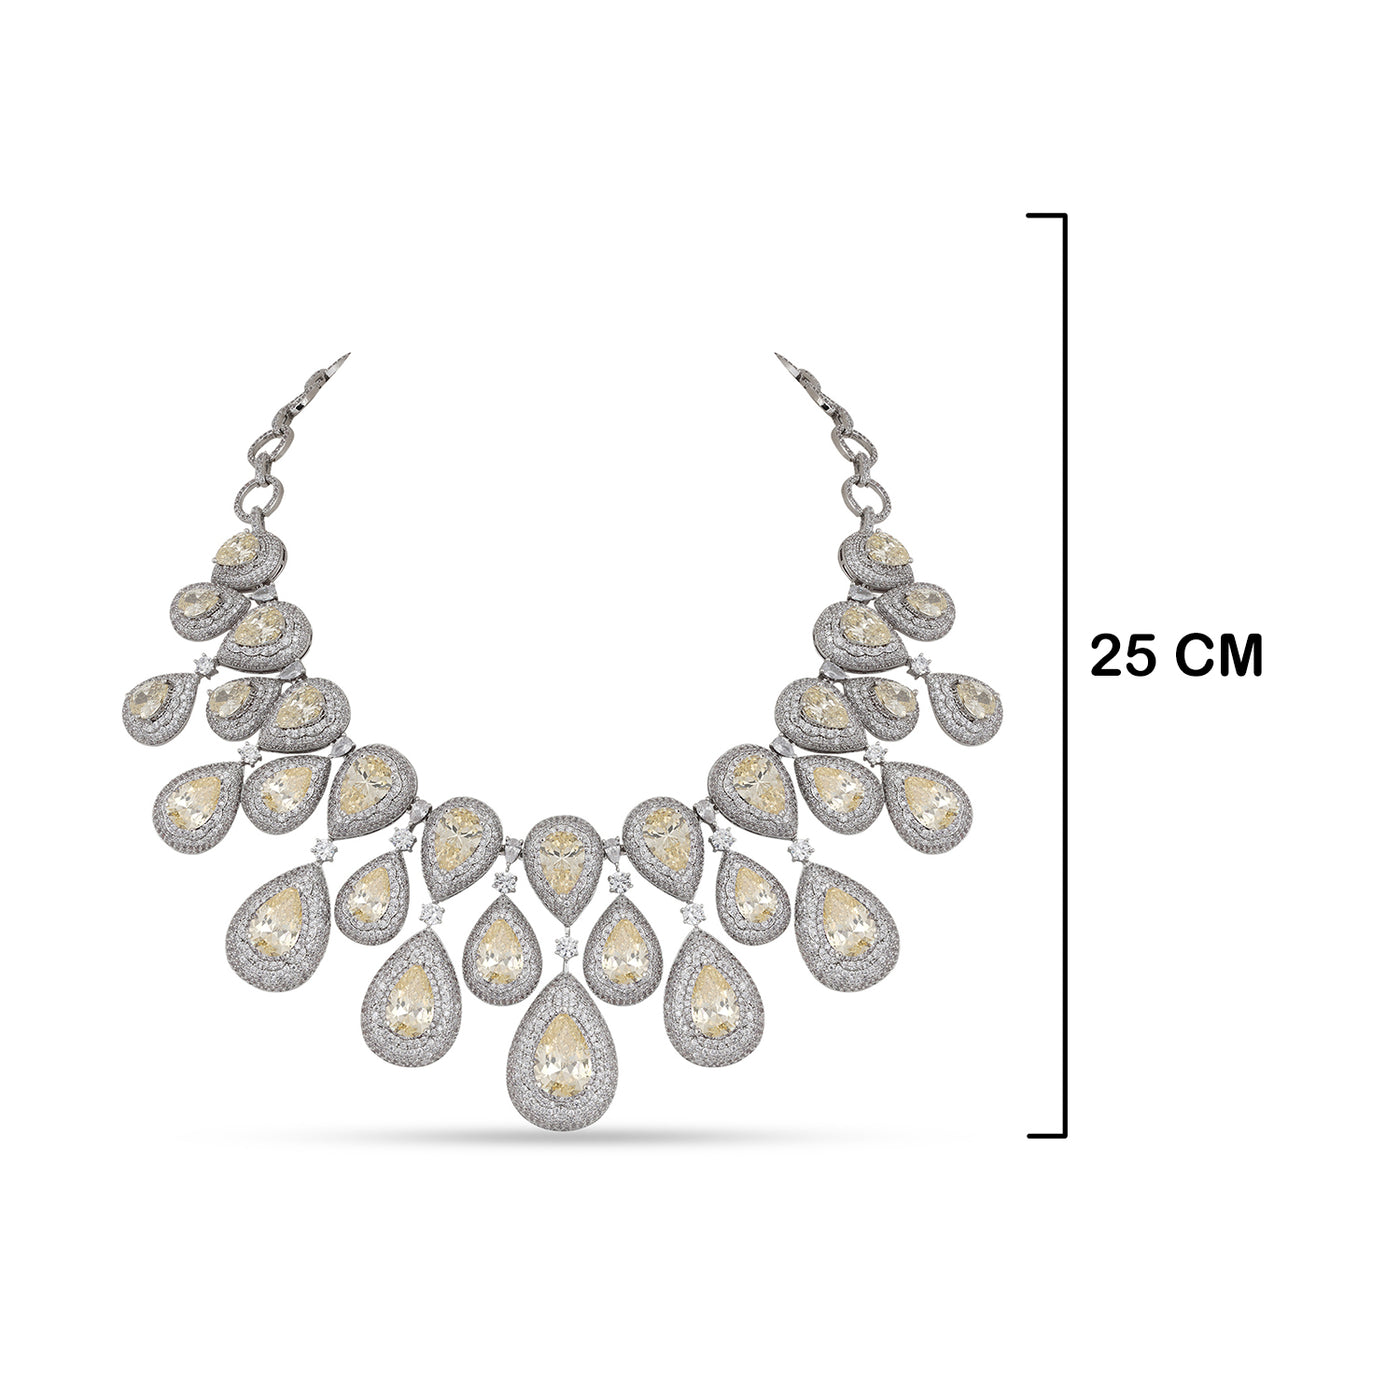 Yellow Stoned CZ Necklace with measurements in cm. 25cm.